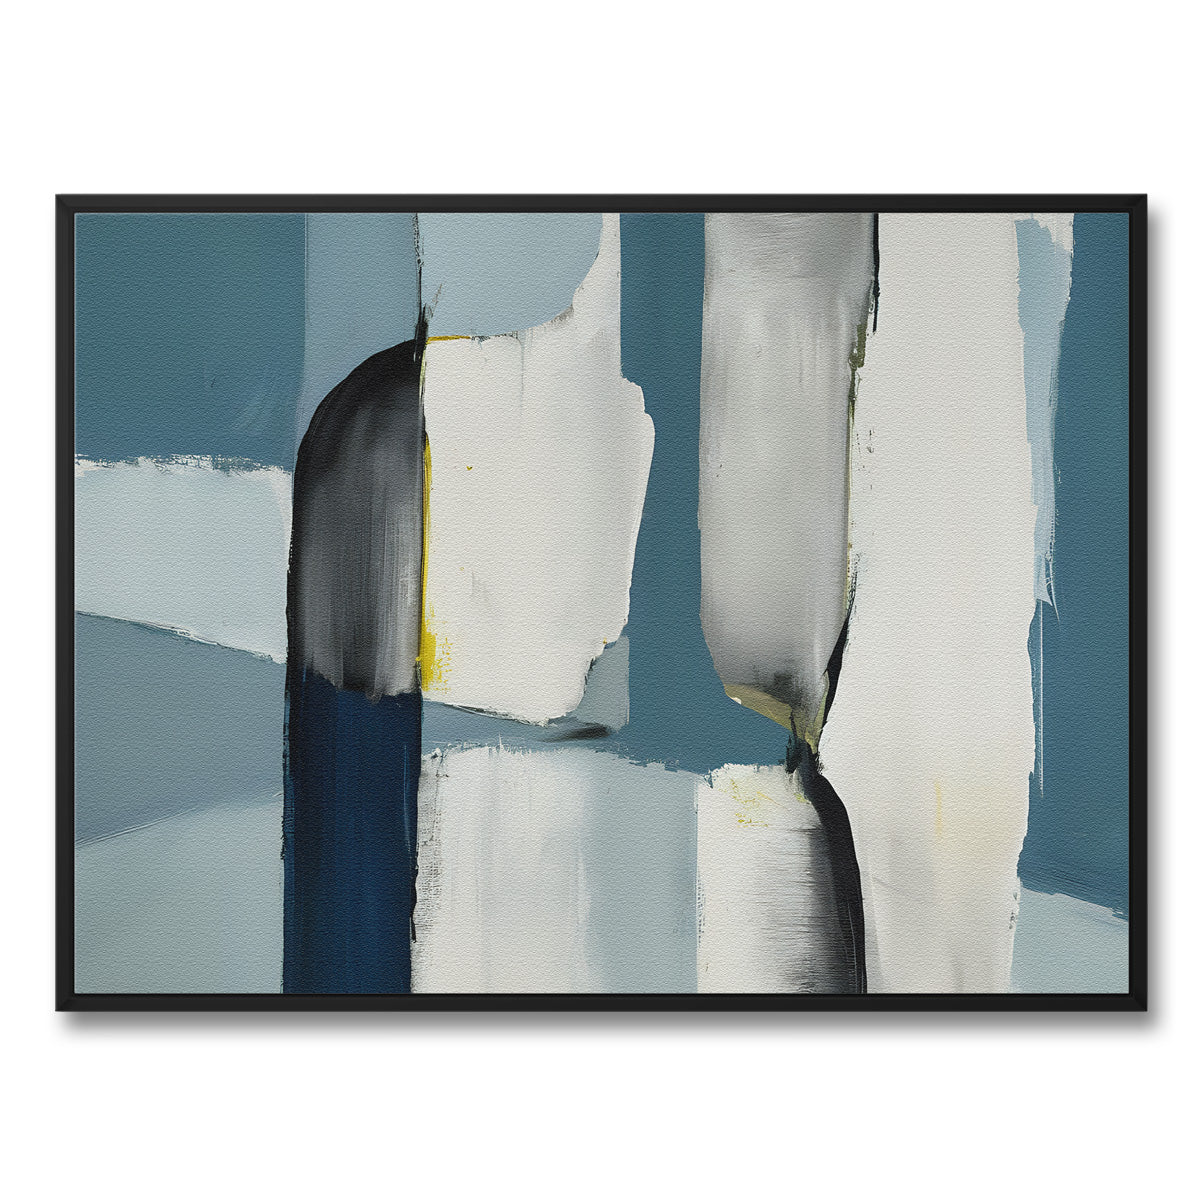 Abstract 22 is an original and exclusive contemporary abstract art, luxury artwork print. It's Giclée printed on to a finely textured 400gsm artist-grade cotton canvas and stretched over 38mm solid wood artist stretcher bars. Image 1.